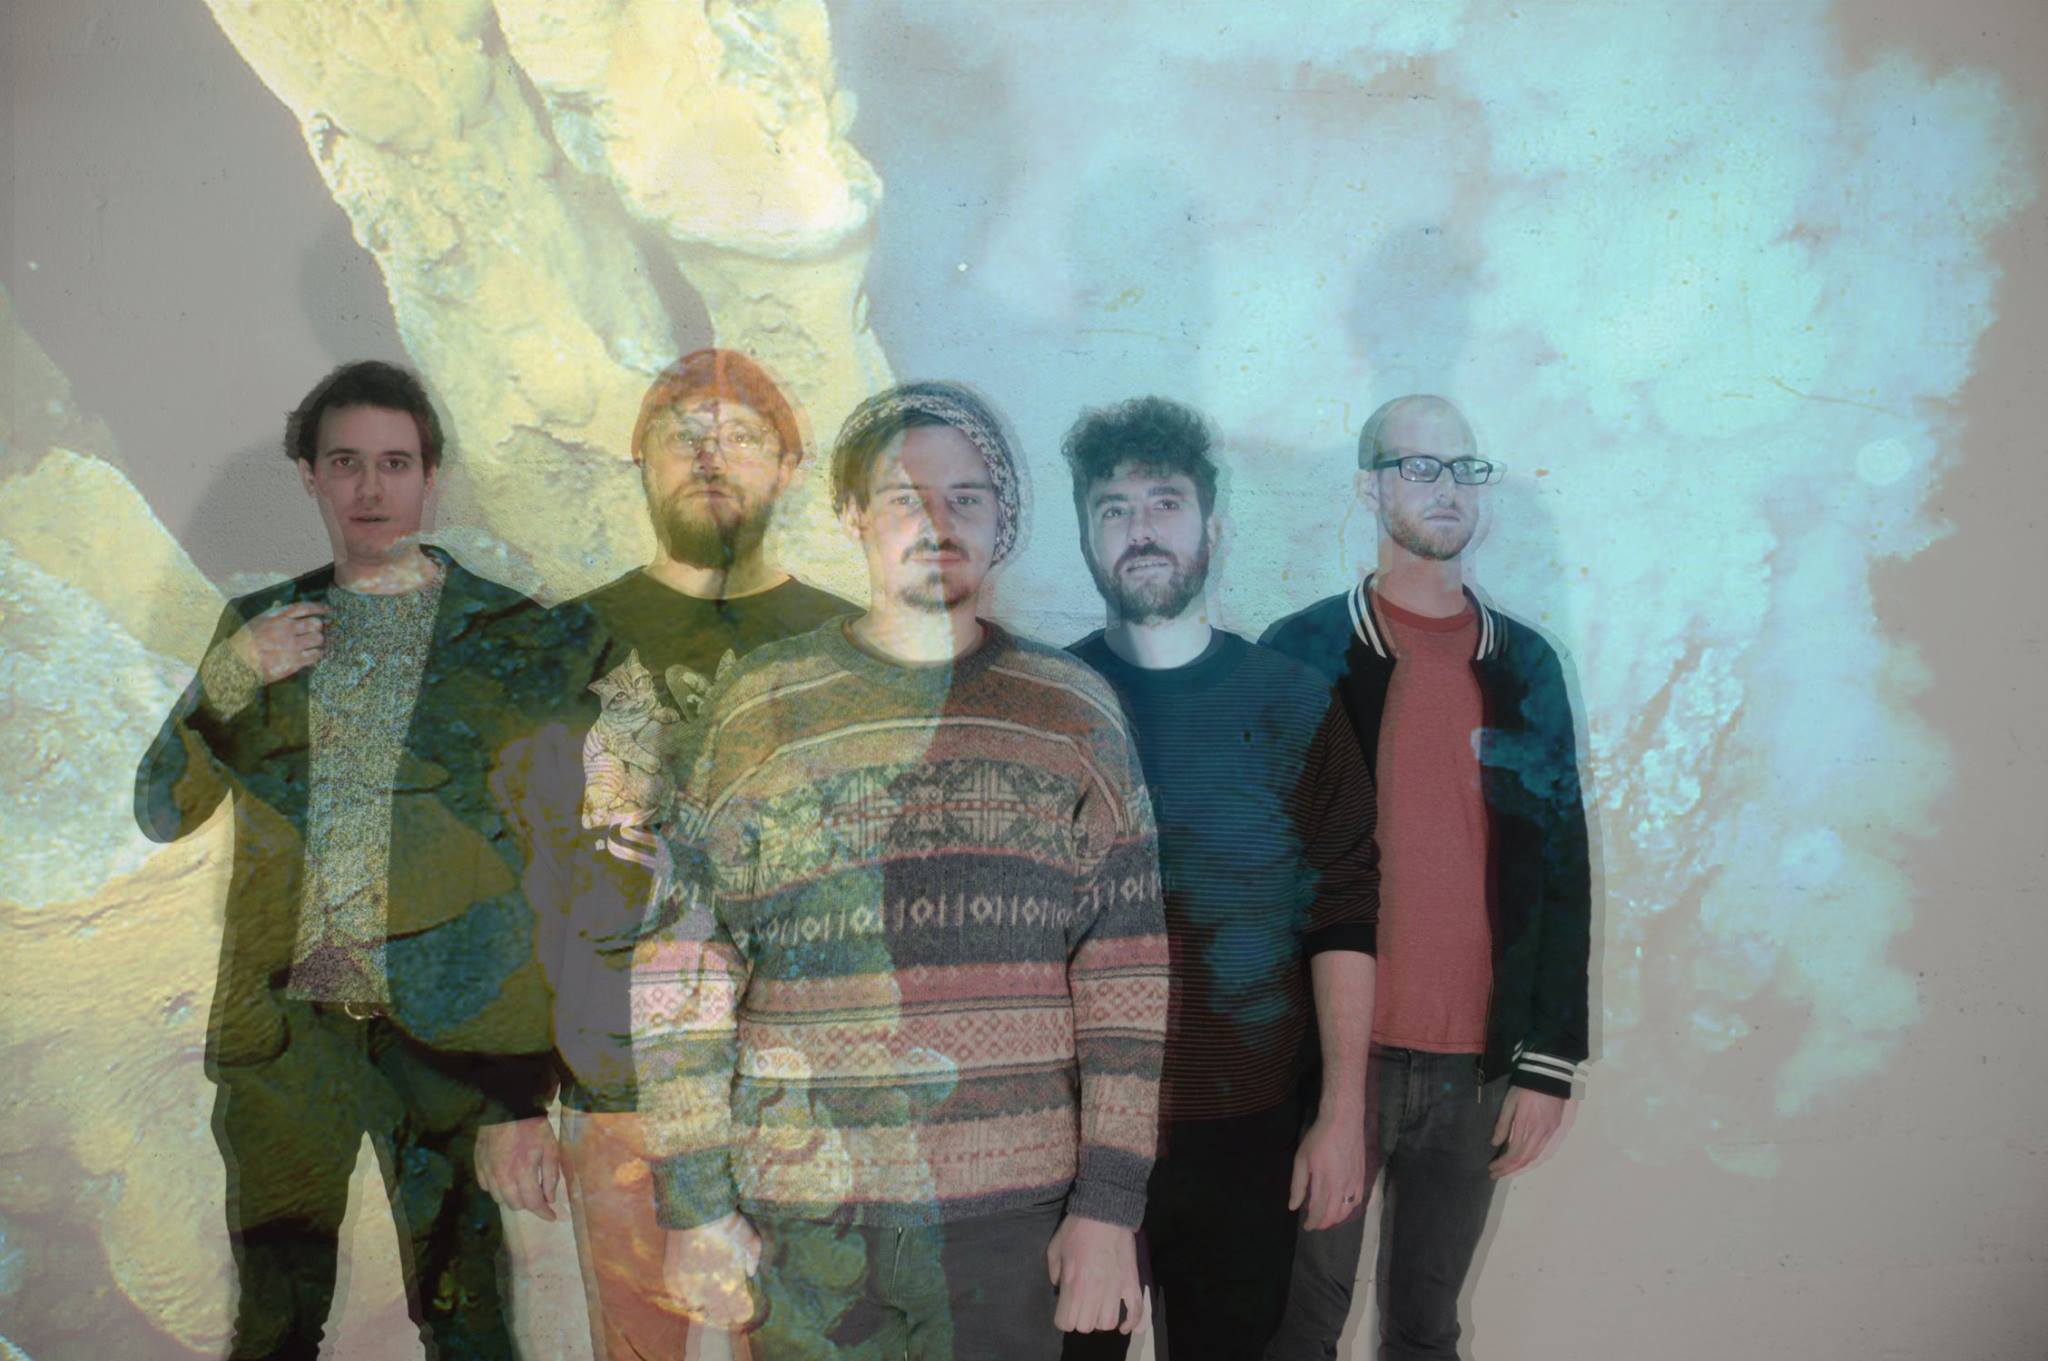 VIDEO PREMIERE: Octopuses - Girl